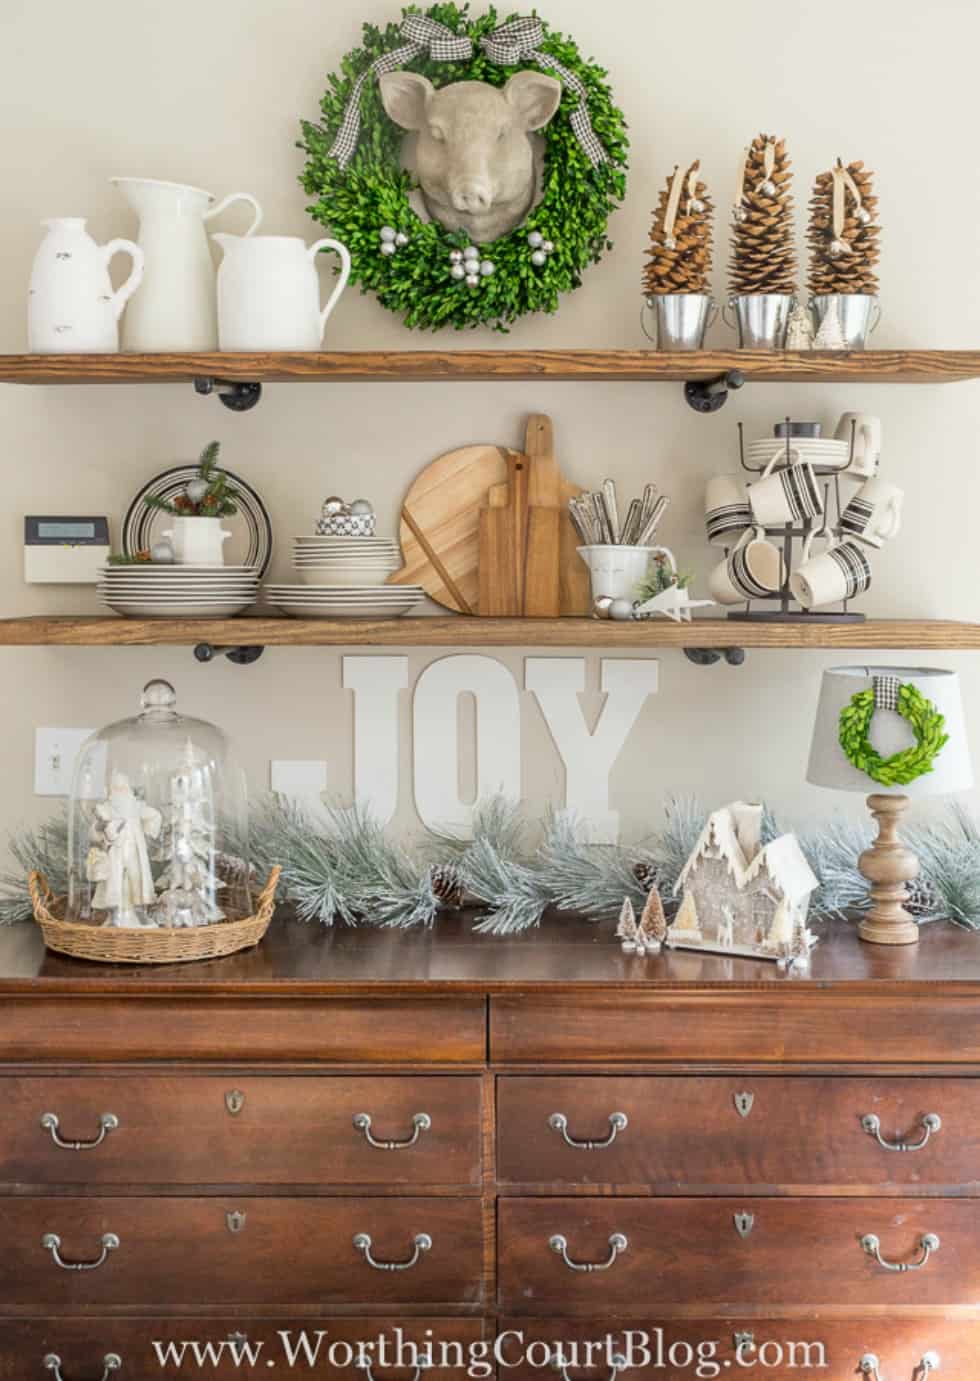 Rustic Industrial Farmhouse Shelves Decorated For Christmas